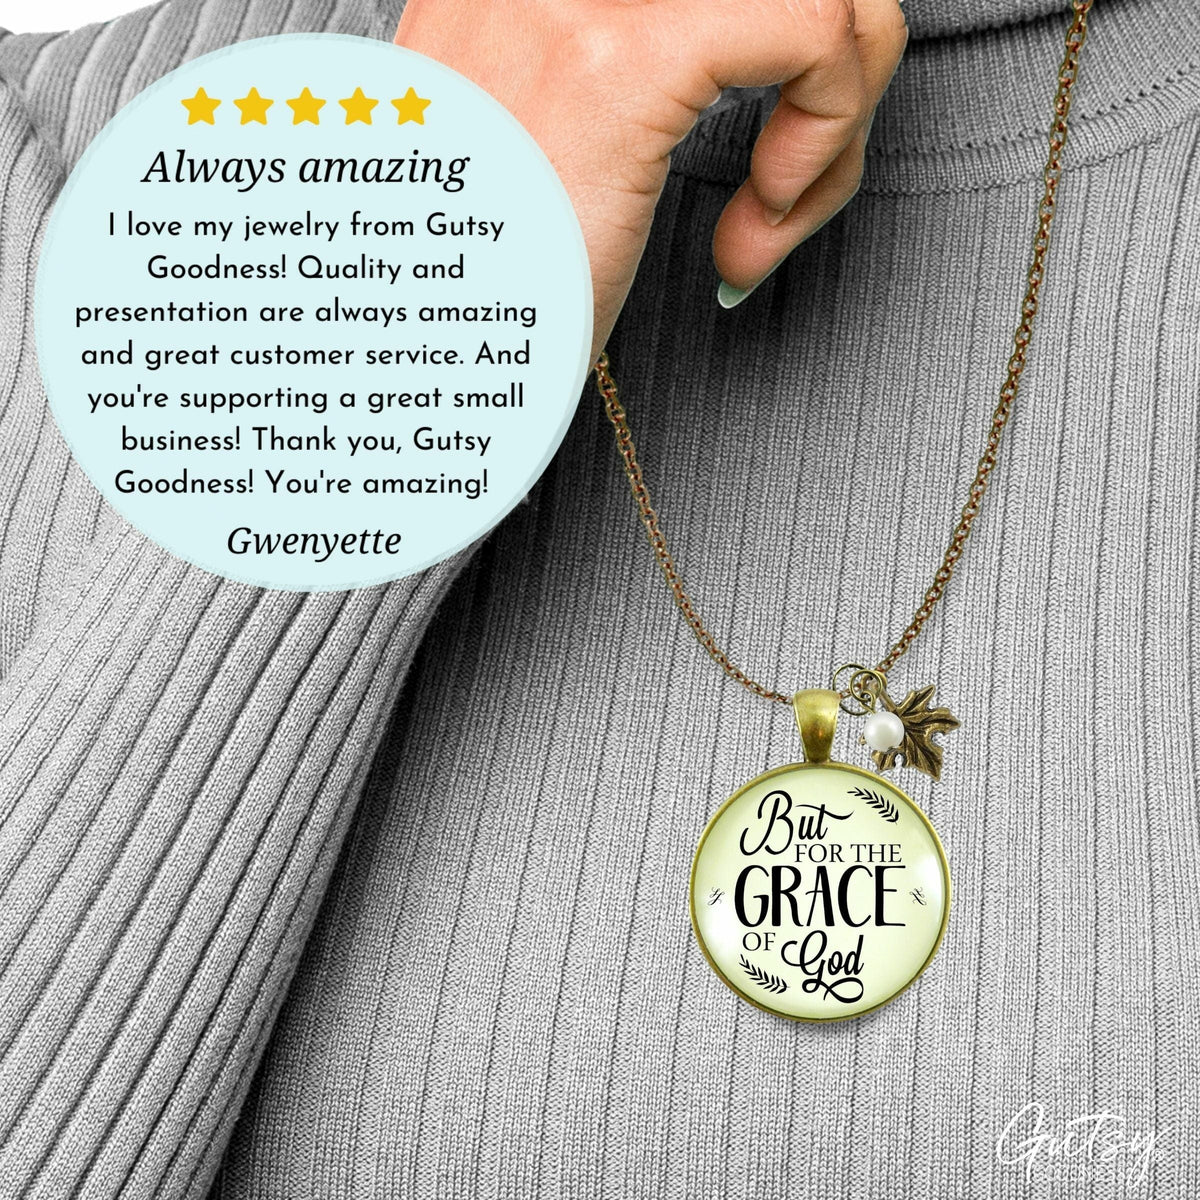 Faith Necklace But For The Grace of God Inspirational Encouragement Jewelry - Gutsy Goodness Handmade Jewelry;Faith Necklace But For The Grace Of God Inspirational Encouragement Jewelry - Gutsy Goodness Handmade Jewelry Gifts